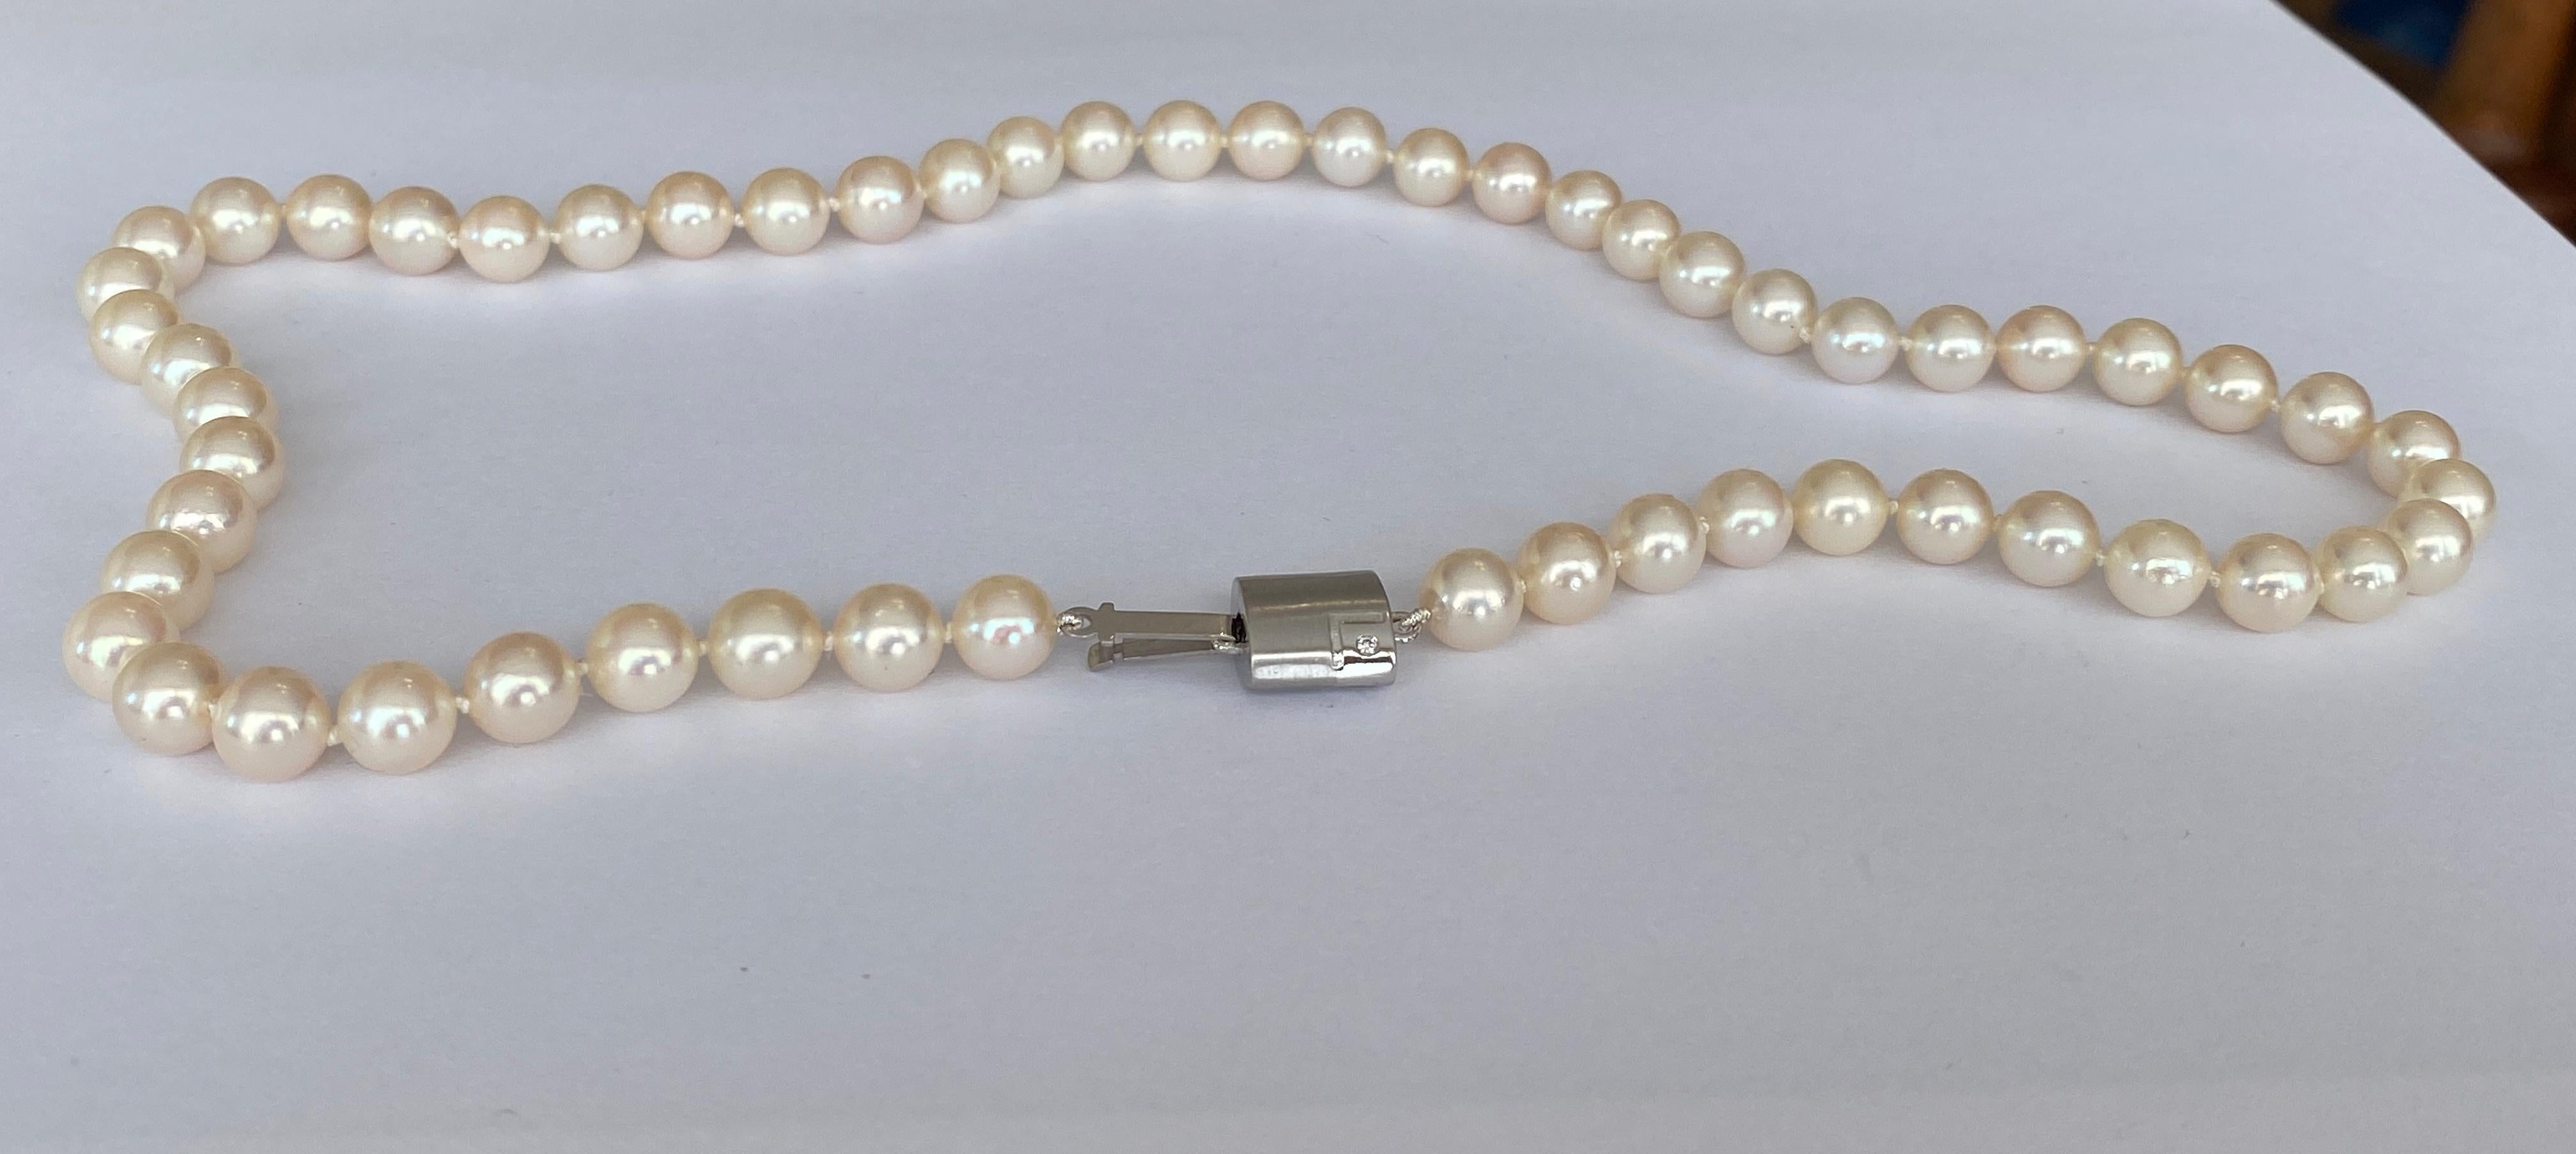 Women's Akoya pearl necklace with 18 kt white gold clasp and one diamond